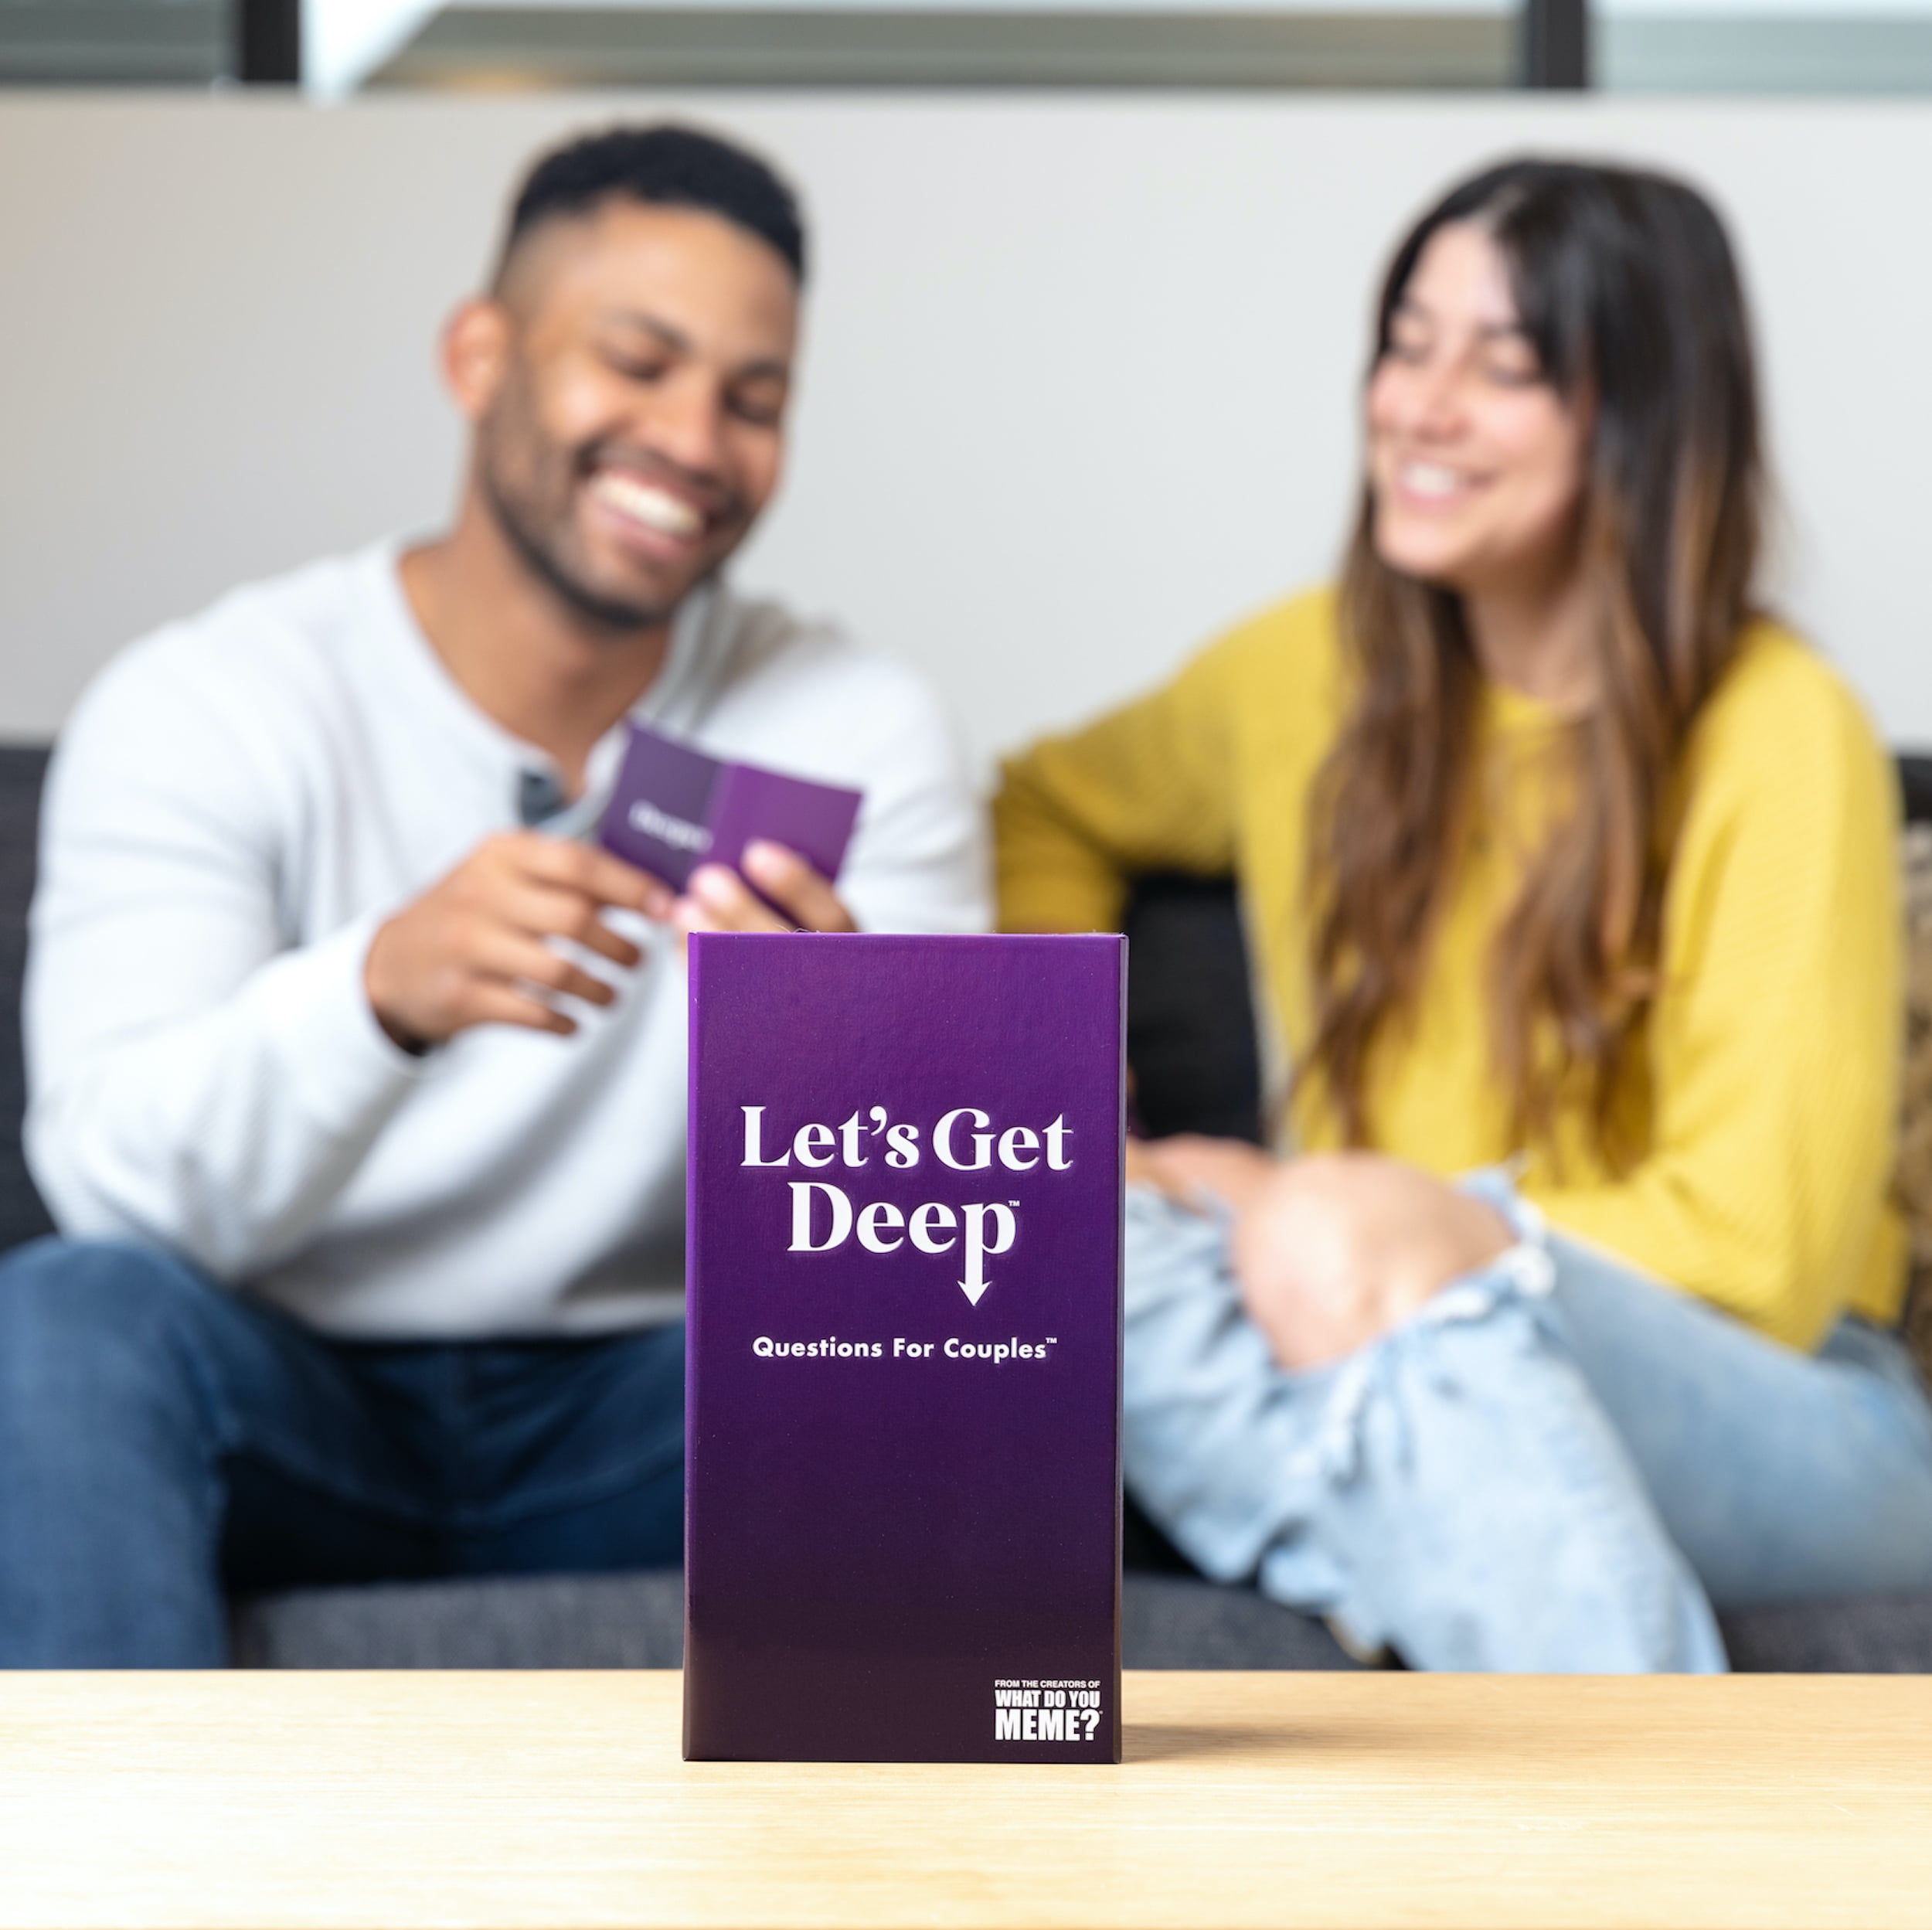 Let's Get Deep - The Adult Party Game for Couples by What Do You 